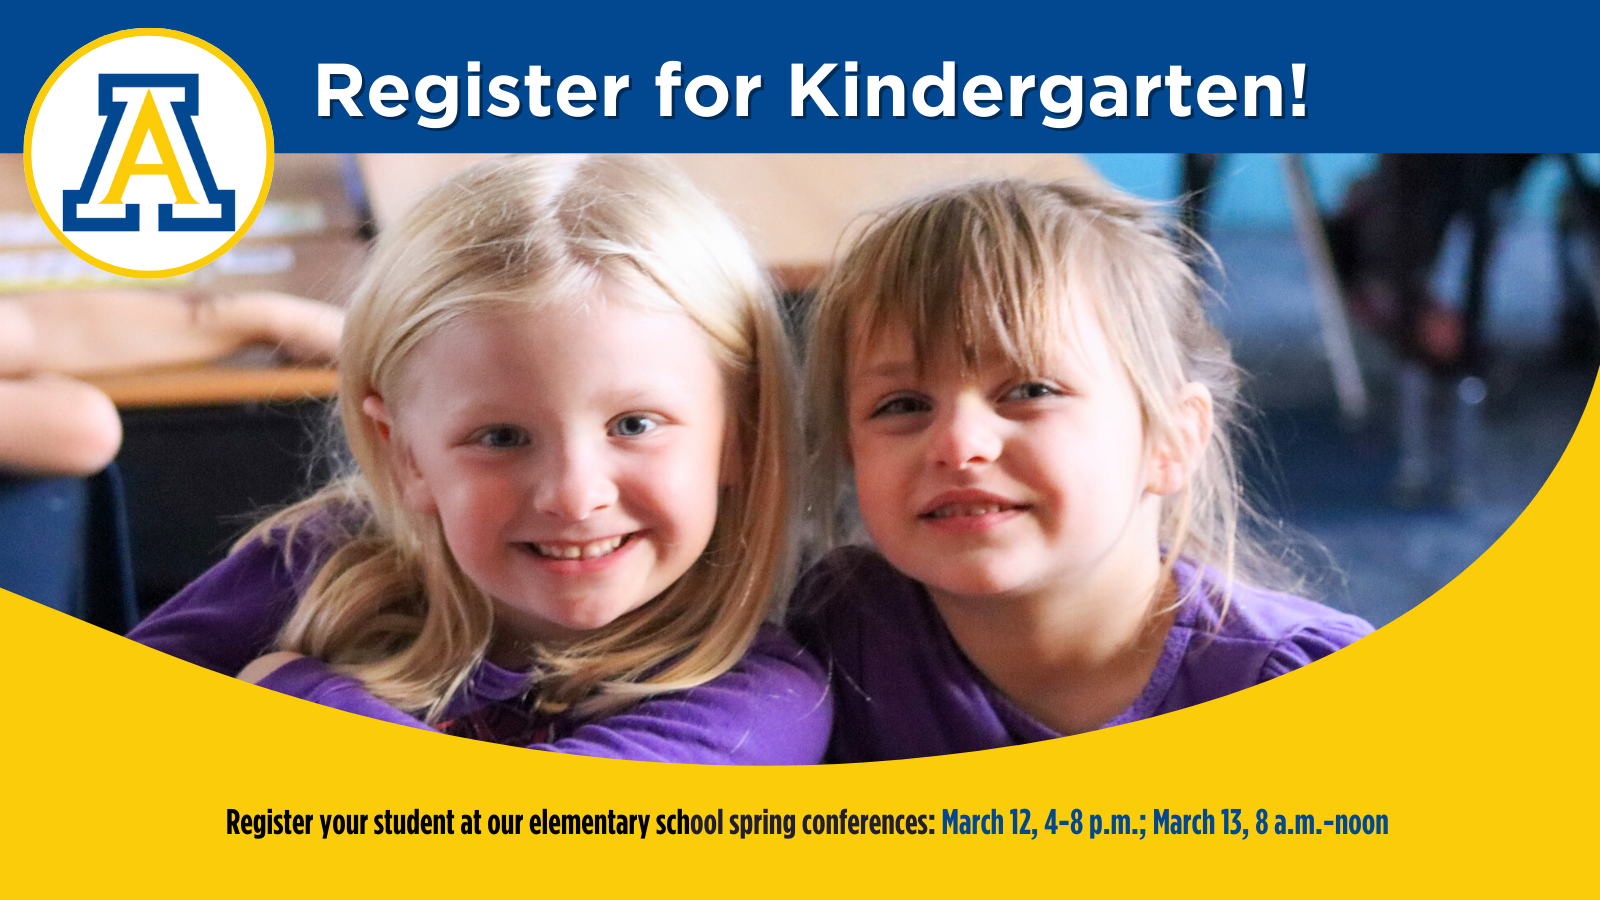 Register for Kindergarten graphic - register during spring conferences - March 12, 4-8 p.m.; March 13, 8 a.m.-noon